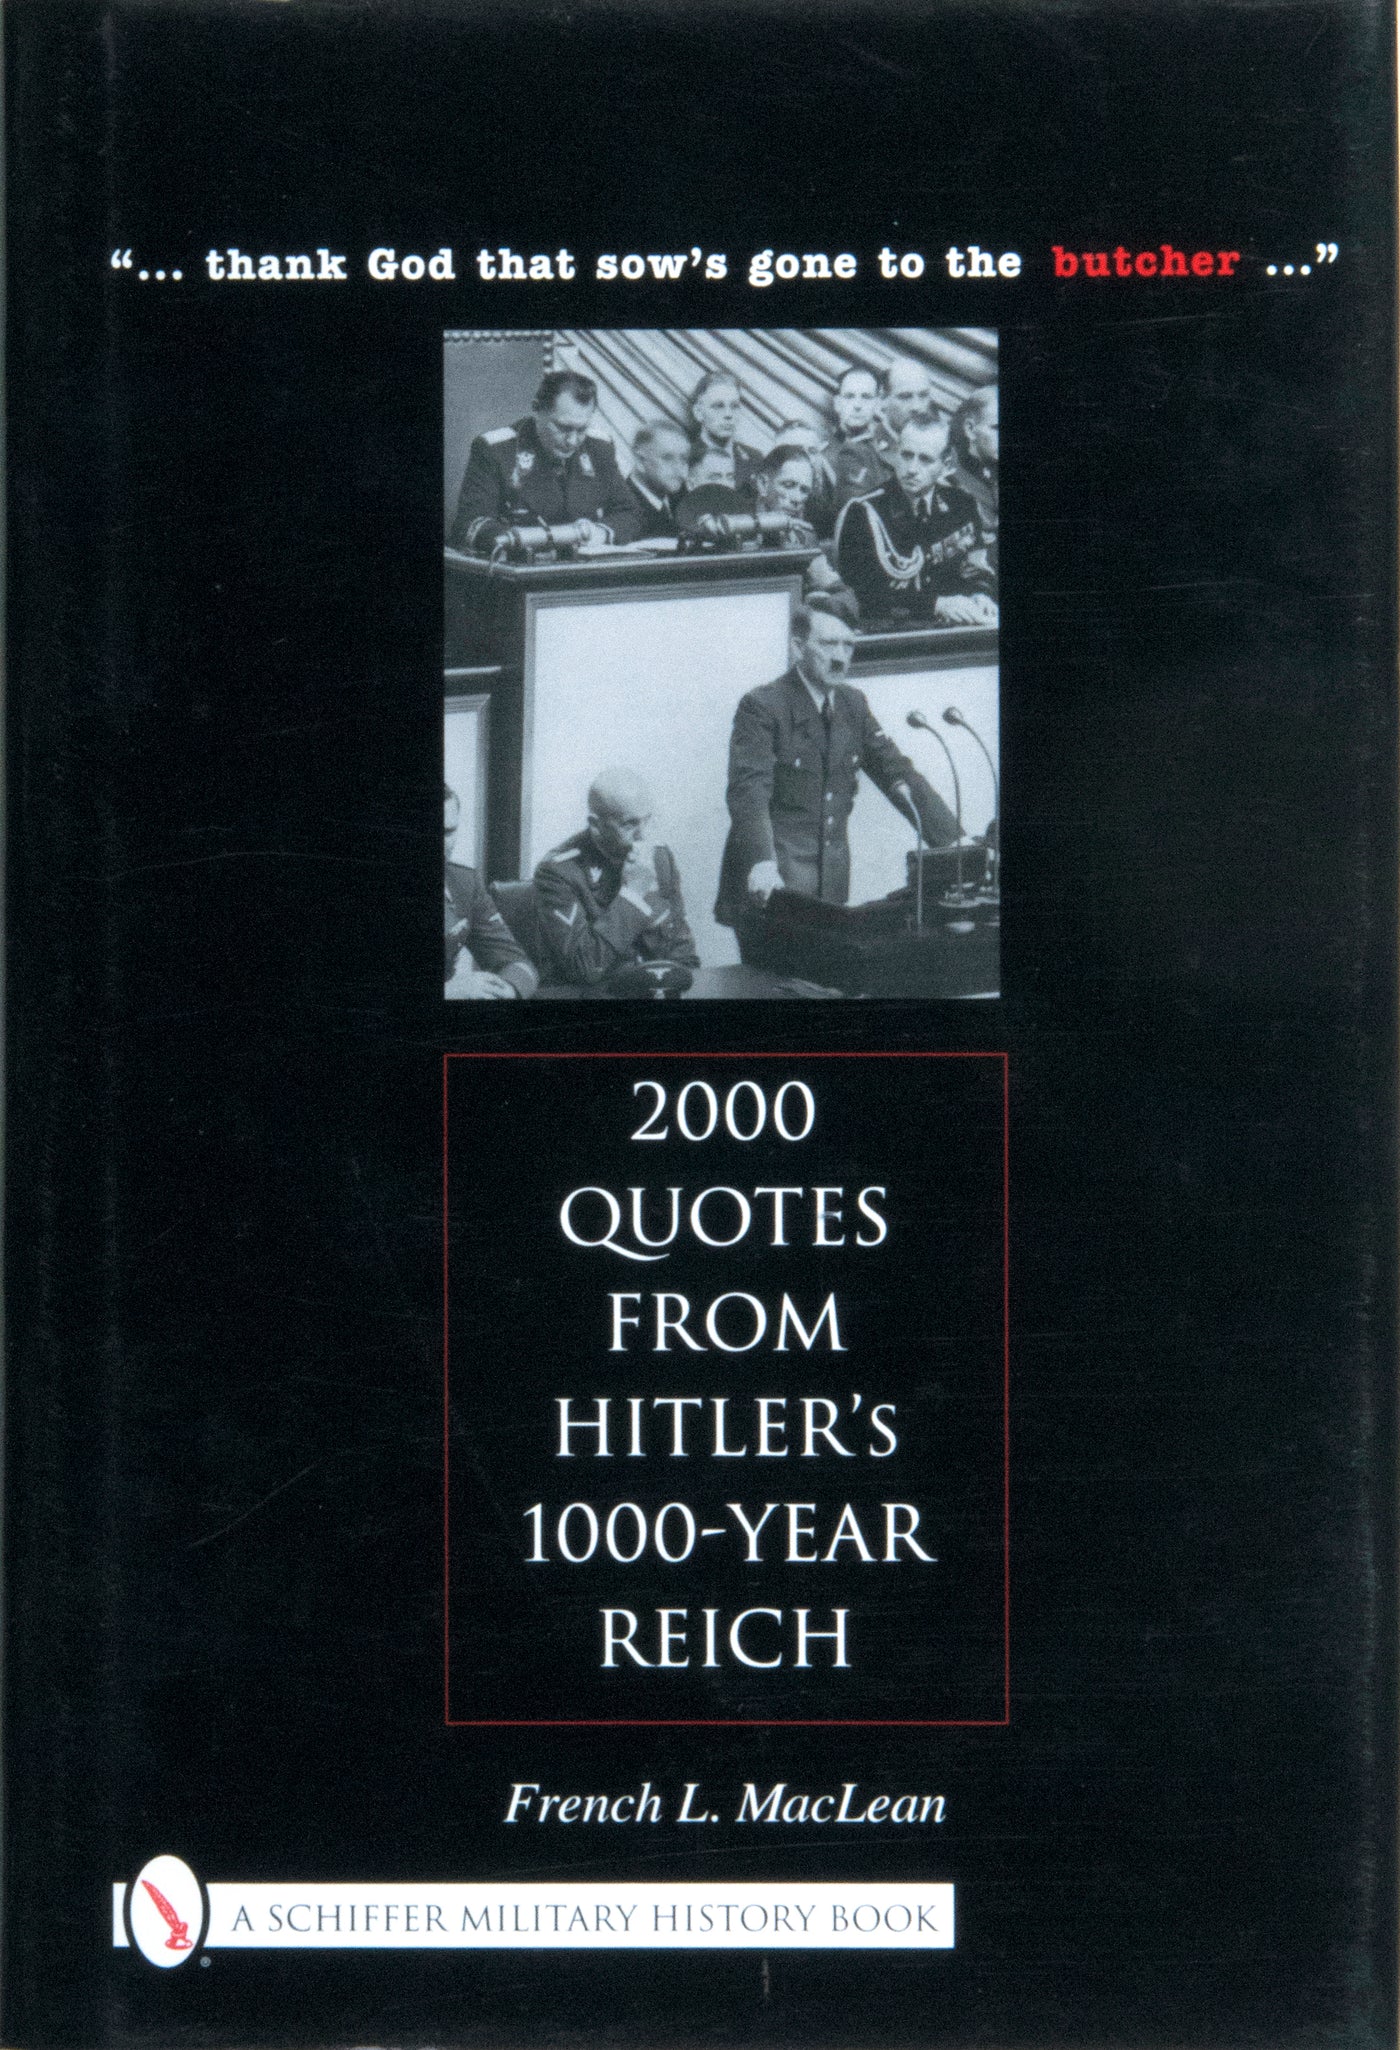 2000 Quotes from Hitler's 1000-Year Reich